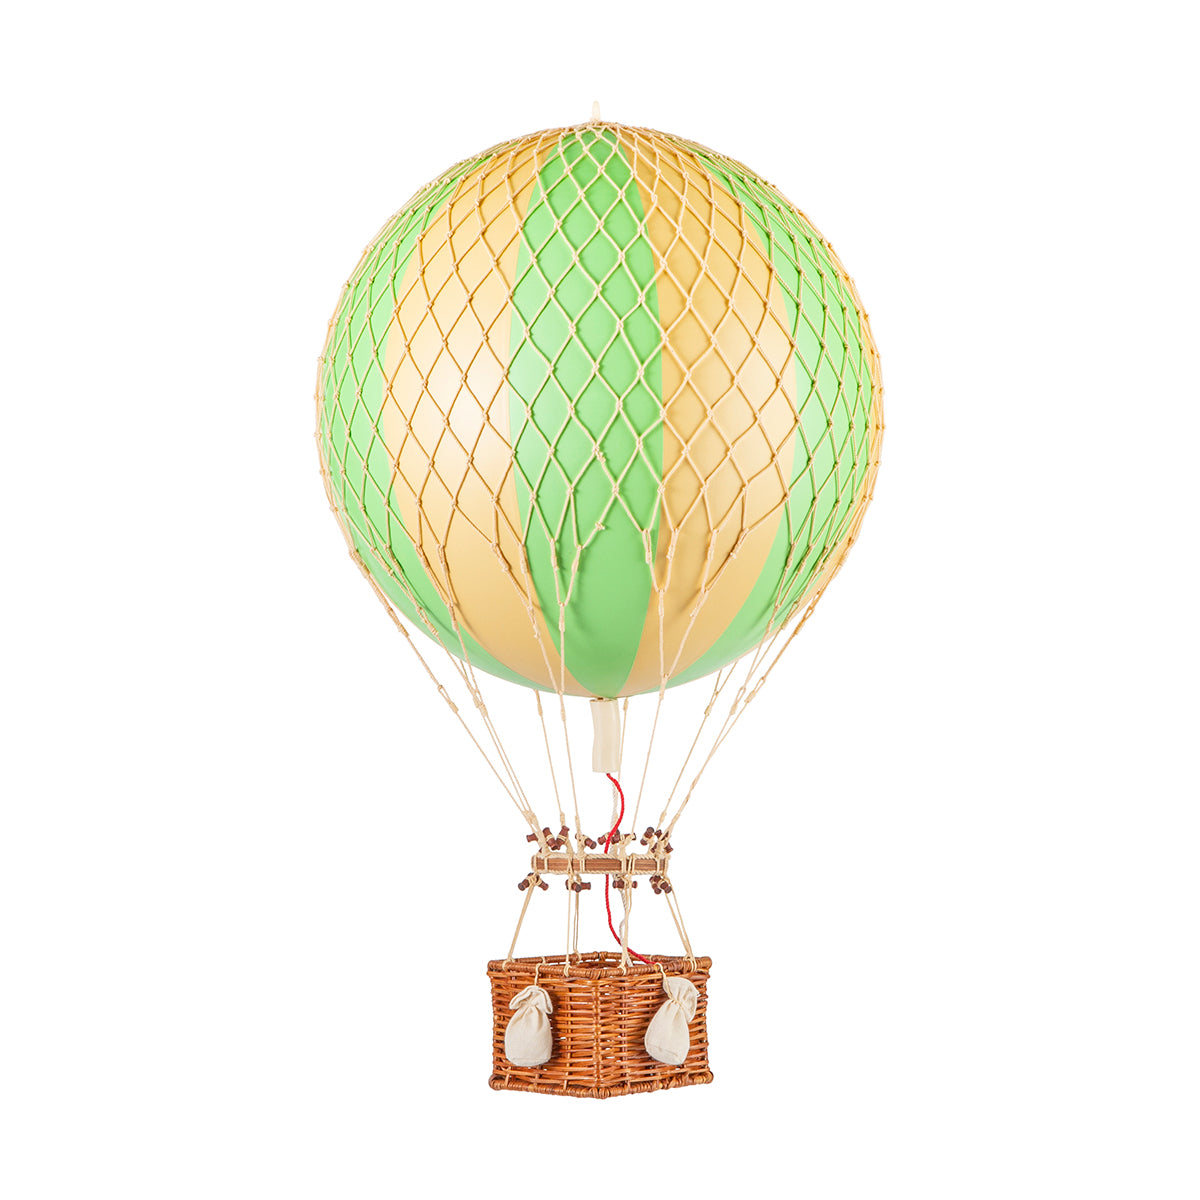 Experience a Wonderen Medium Hot Air Balloon - Royal Aero ride like no other as you soar to new heights in a green and yellow balloon with a wicker basket. Get ready to embrace a unique perspective of the world from above.